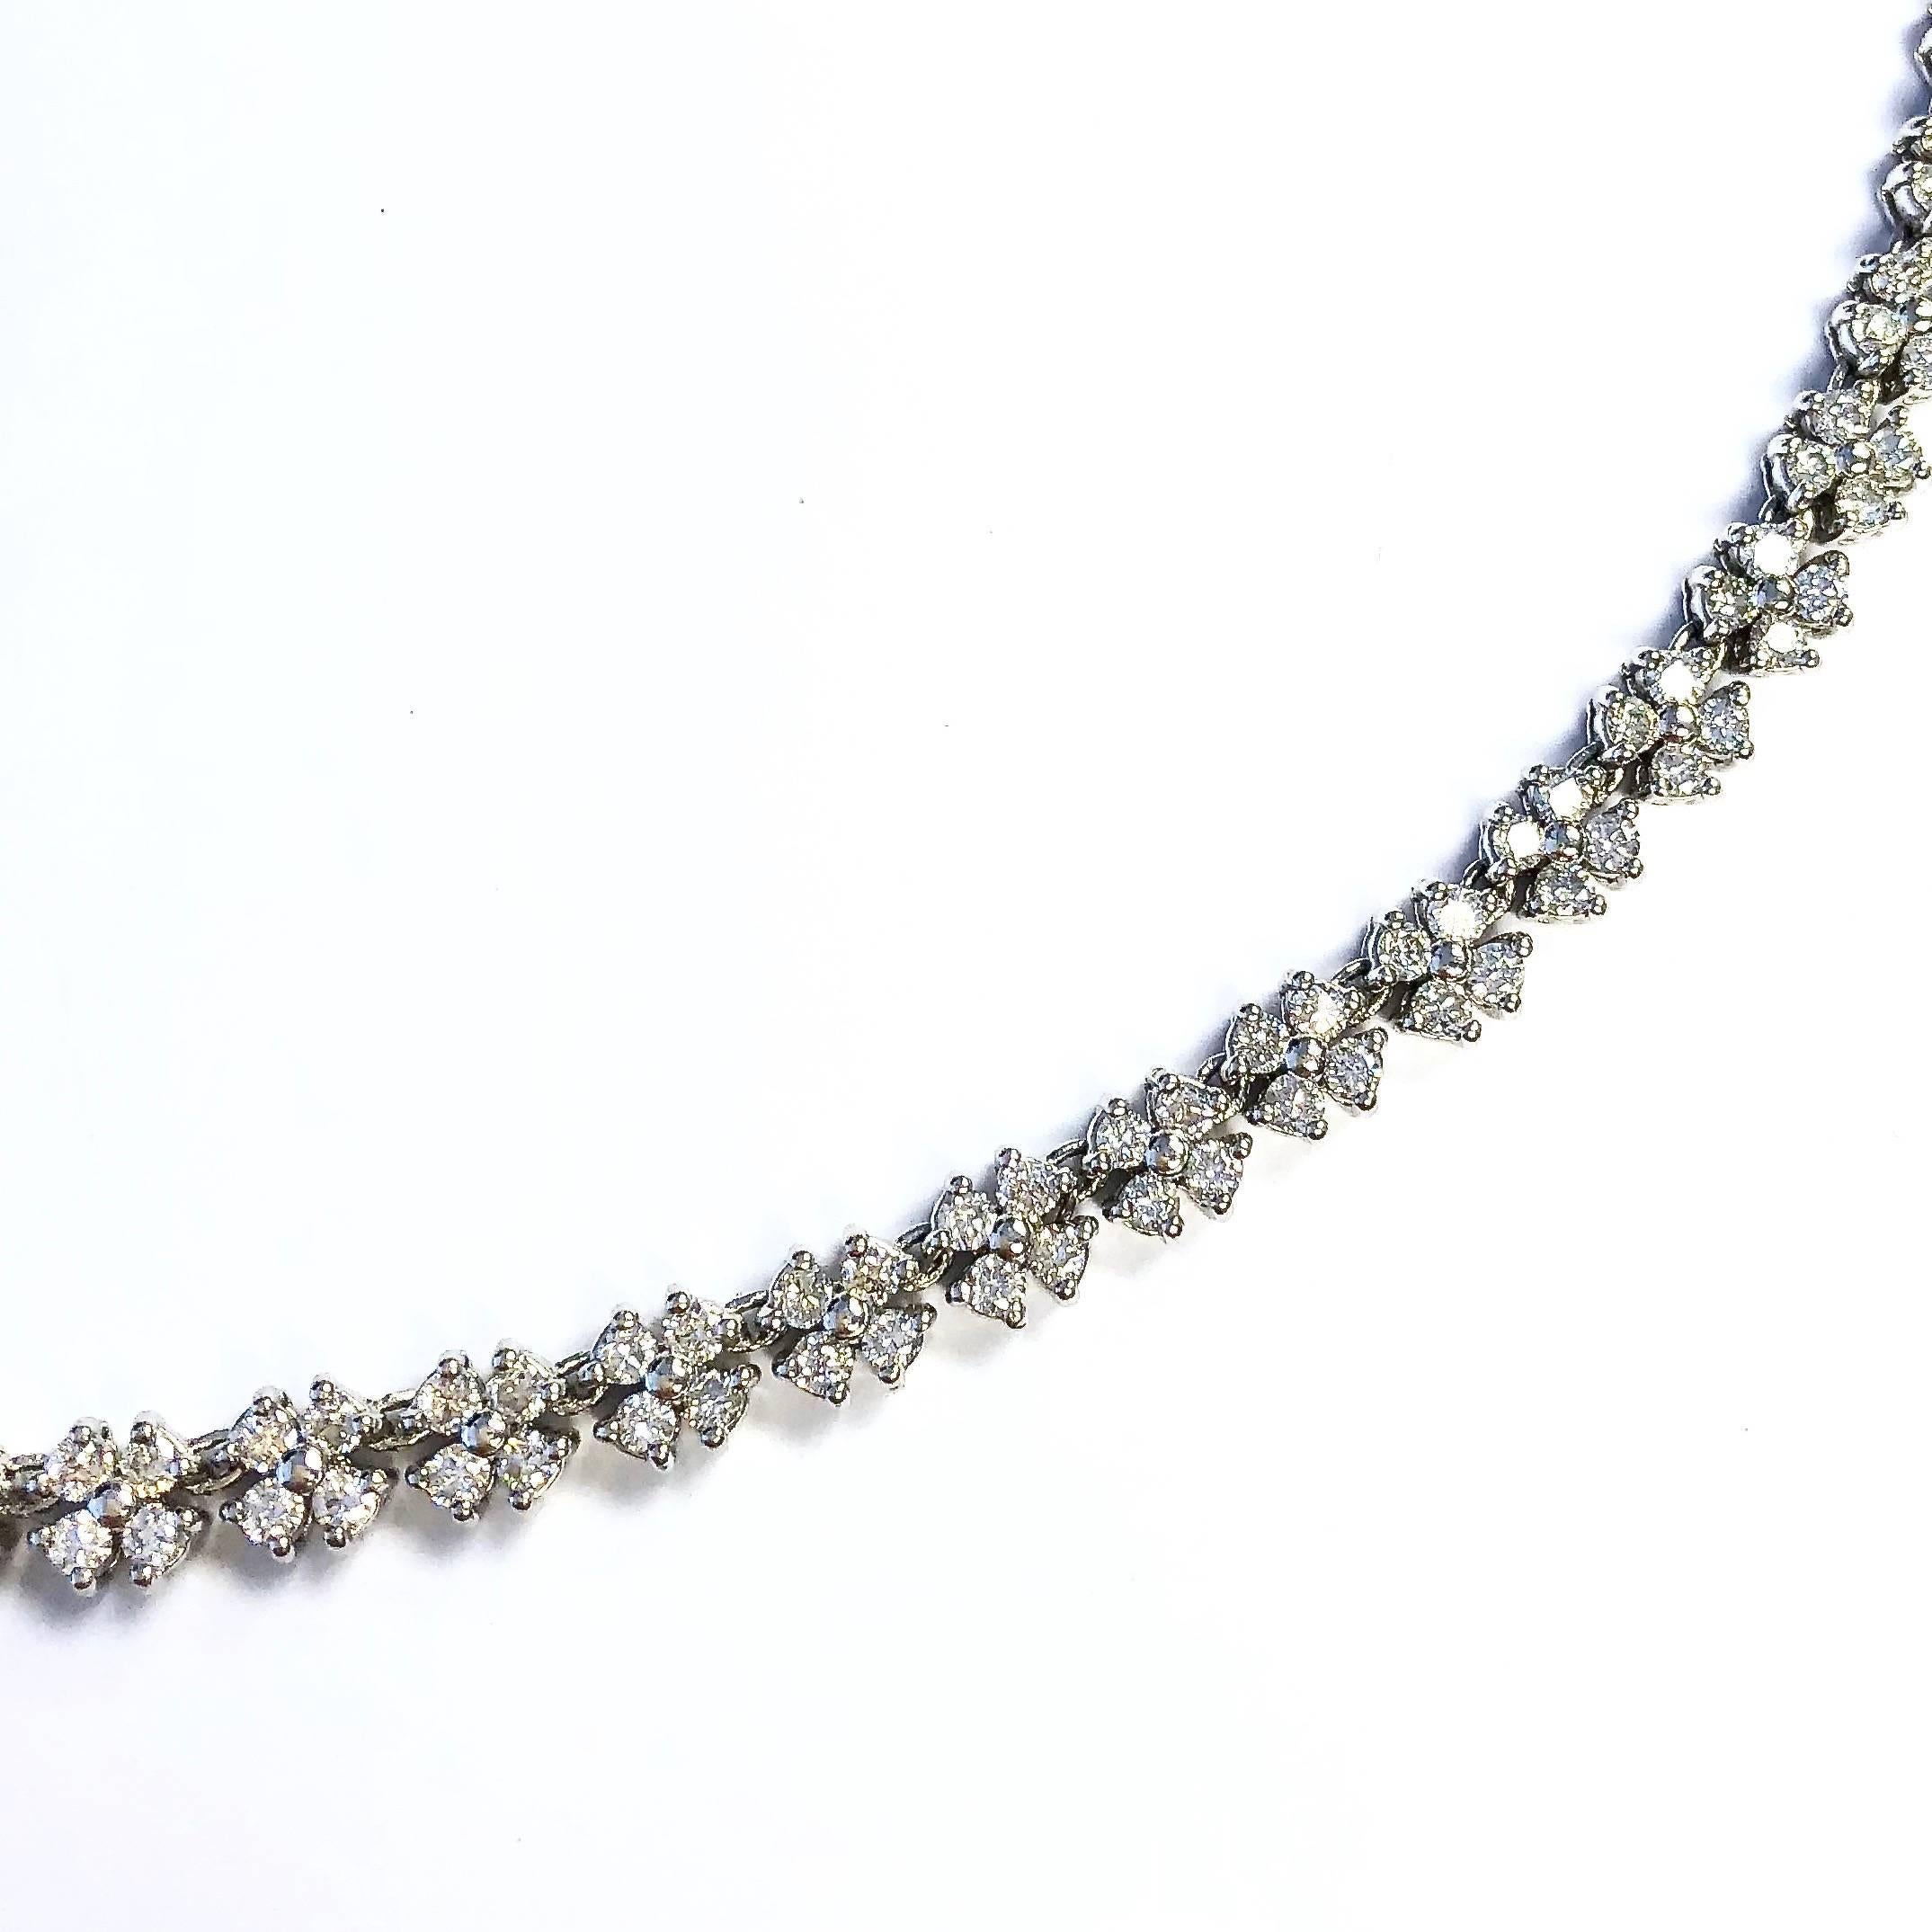 Elegant platinum necklace, composed of a series of four-diamond florets terminating in a hidden clasp with safety. 
272 round brilliant cut diamonds, total weight: 10ct (stamped on clasp). Color: G-H, Clarity: VS2-SI2
Length: 17 inches
Width: 6